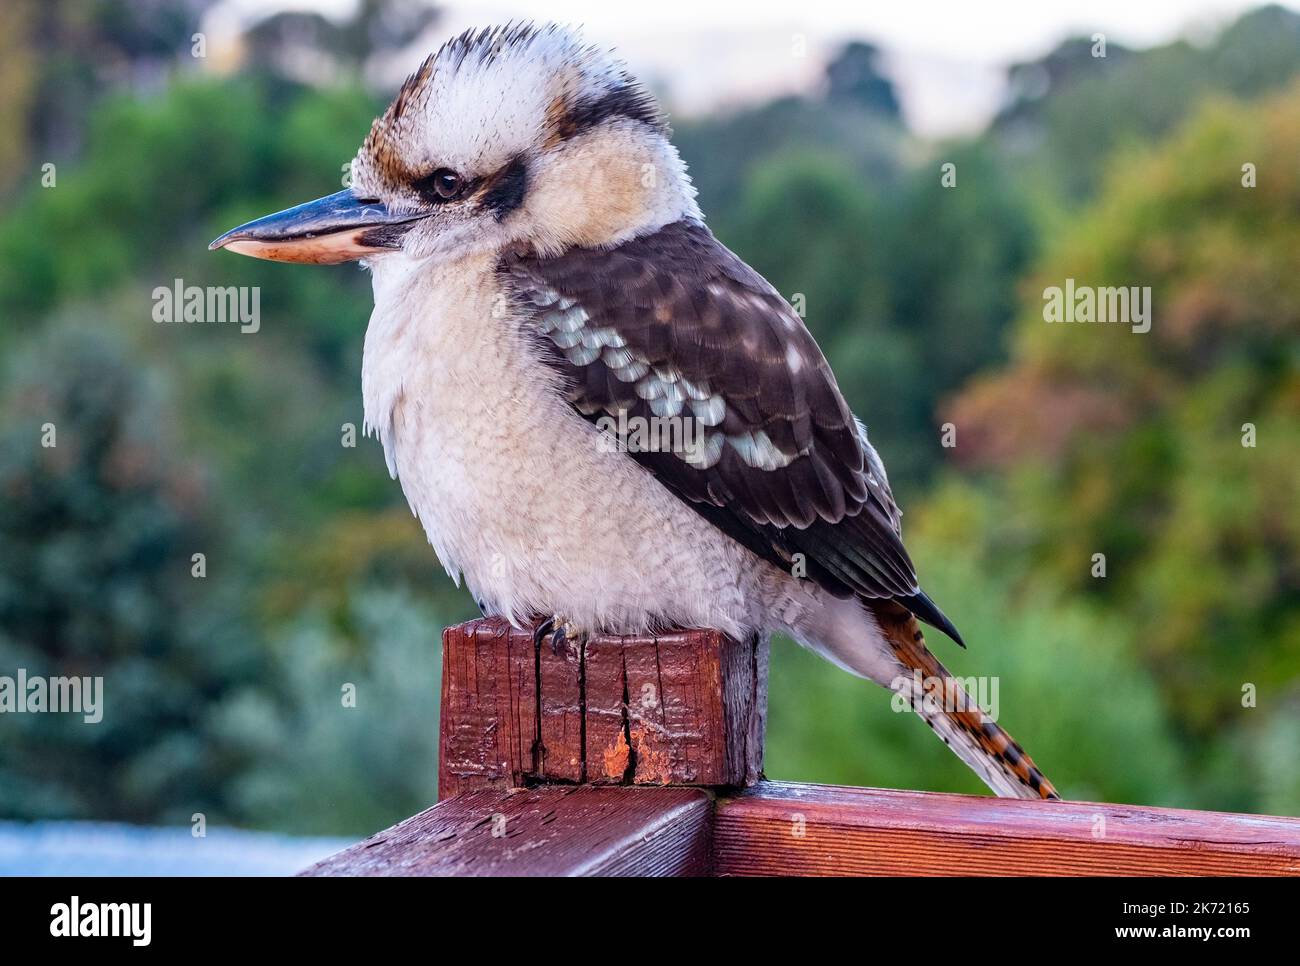 A juvenile Australian kookaburras perched on a post in a suburban garden in Hobart, Tasmania. The kookaburra is not a native species to the island state of Tasmania, but was introduced in the 1950s Stock Photo